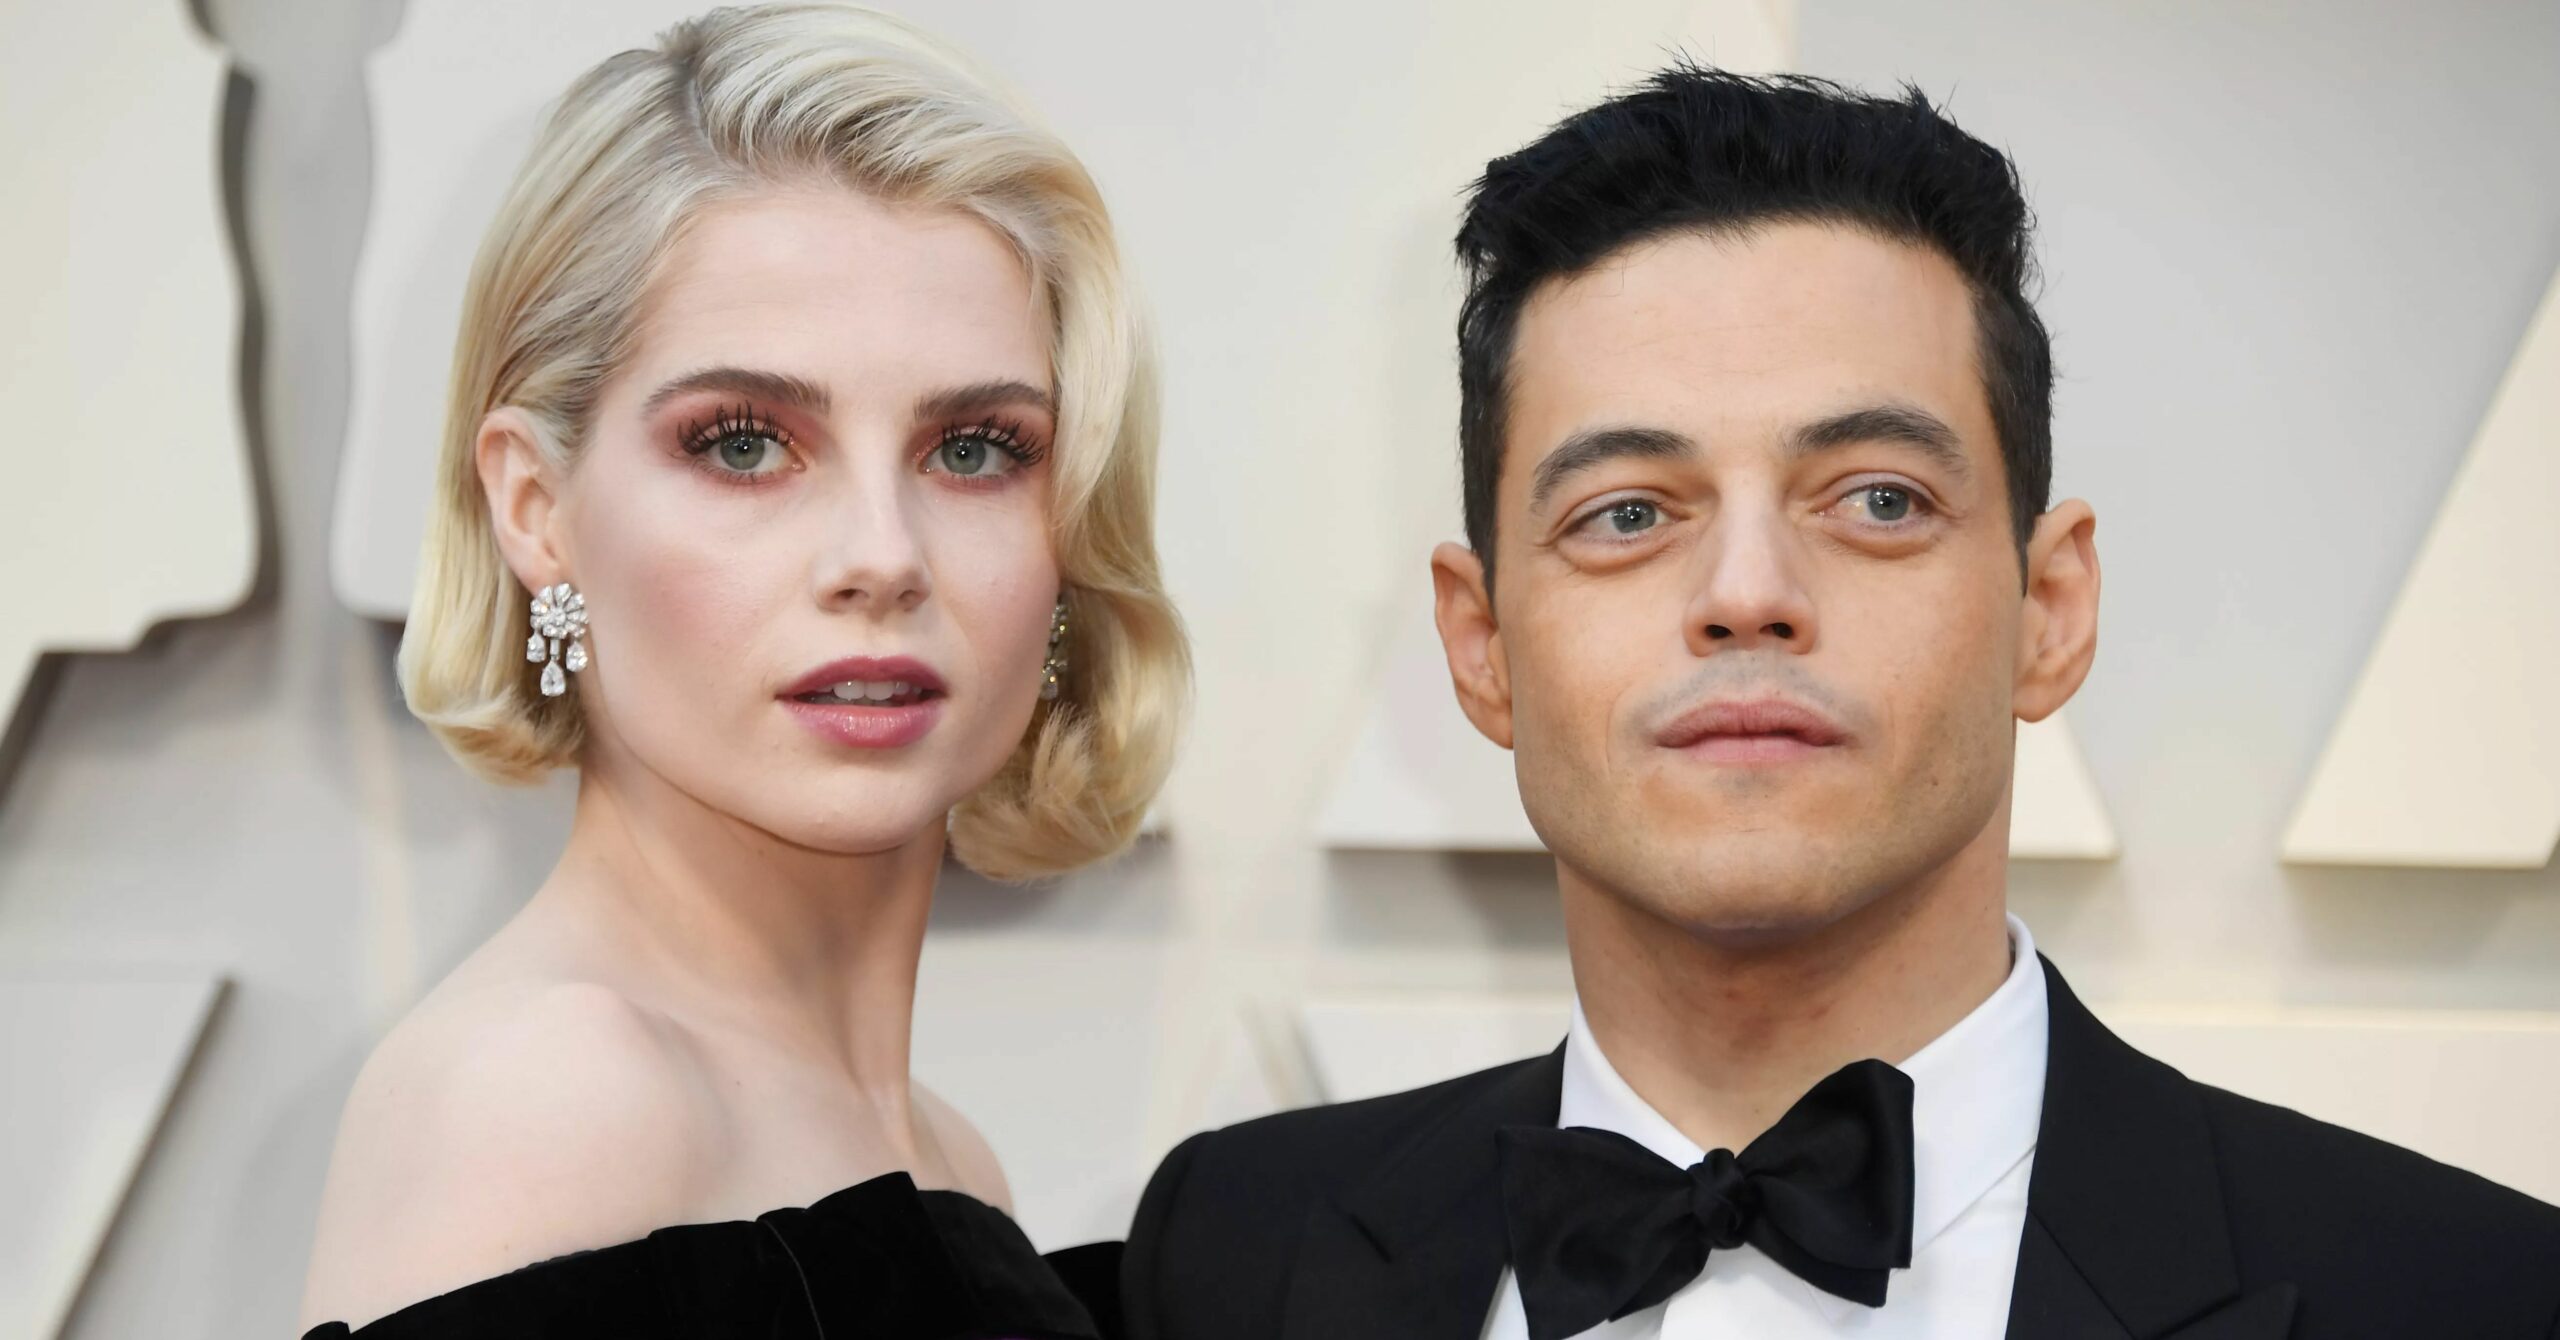 Rami Malek and Lucy Boynton: How They Became a Hollywood Power Couple